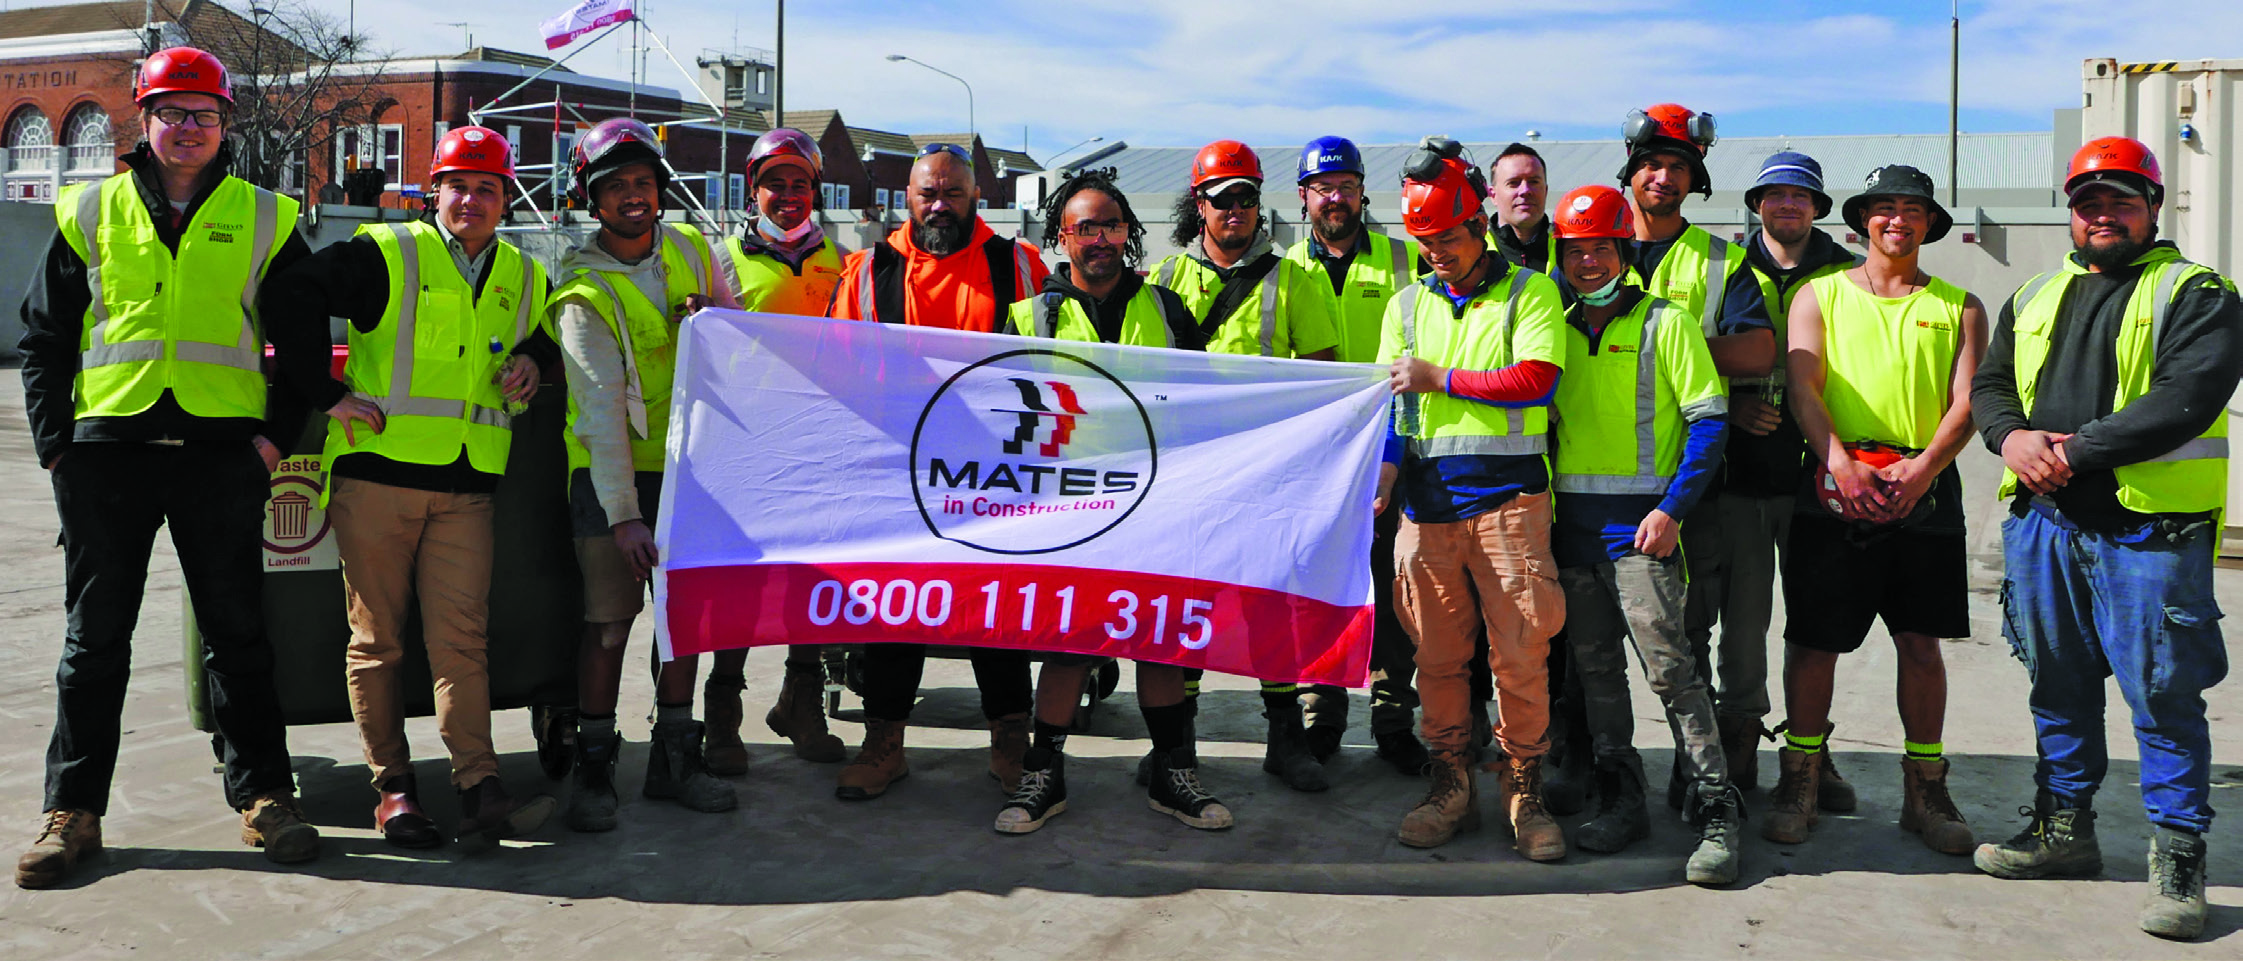 Mates flags were raised on the site of the former Cadbury distribution warehouse last week, with...